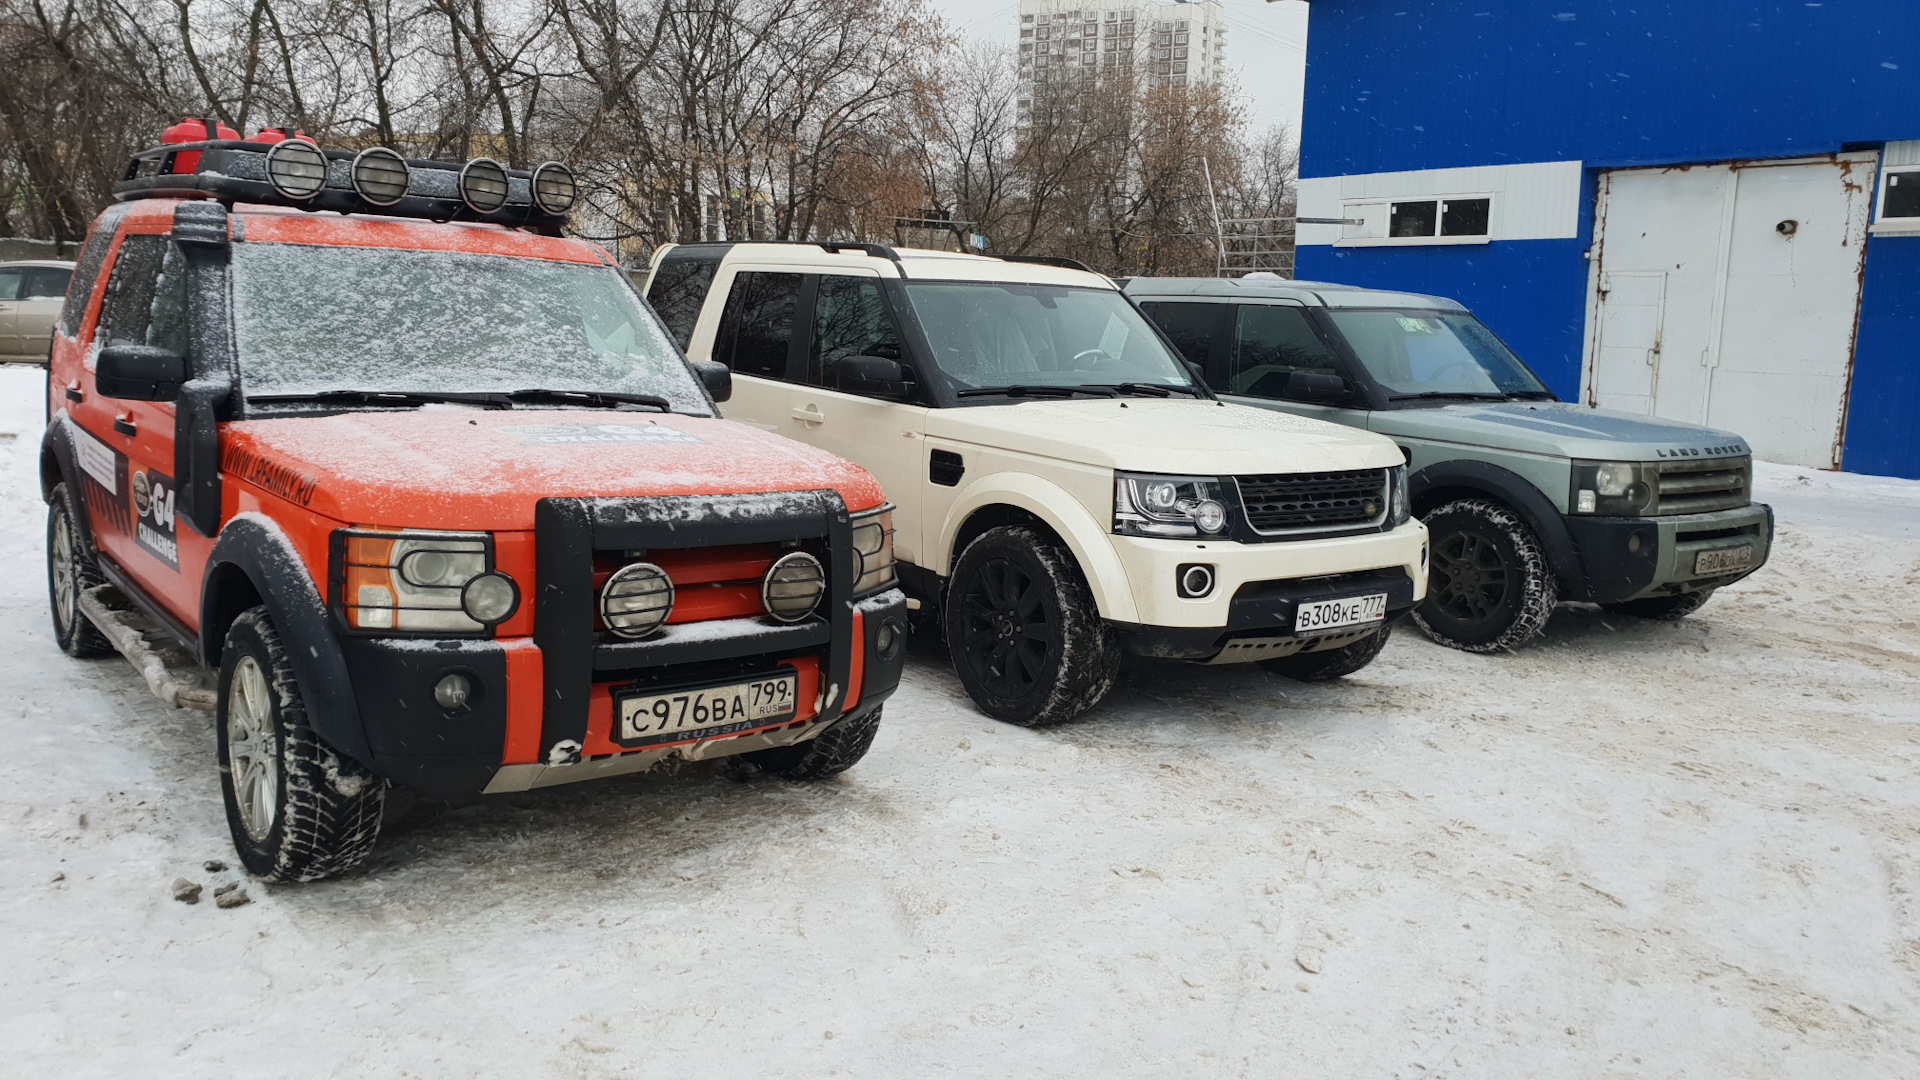 Свап дискавери 3. Land Rover Discovery 3 g4. Land Rover Discovery 3 Tuning. Ленд Ровер Дискавери 3 g4 Challenge. Land Rover Discovery 3 хаки.